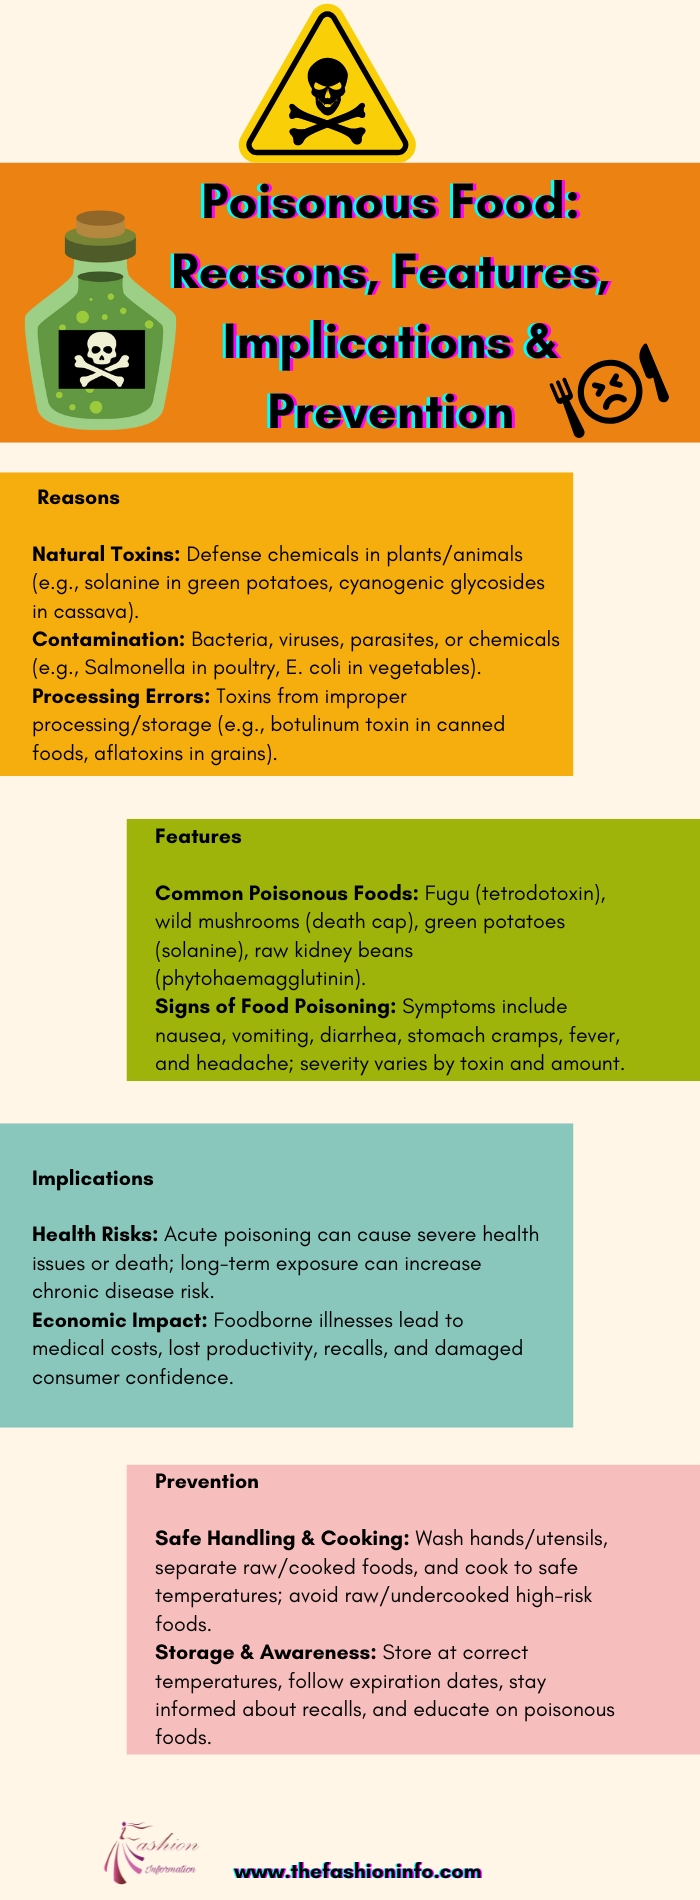 Poisonous Food Reasons, Features, Implications & Prevention